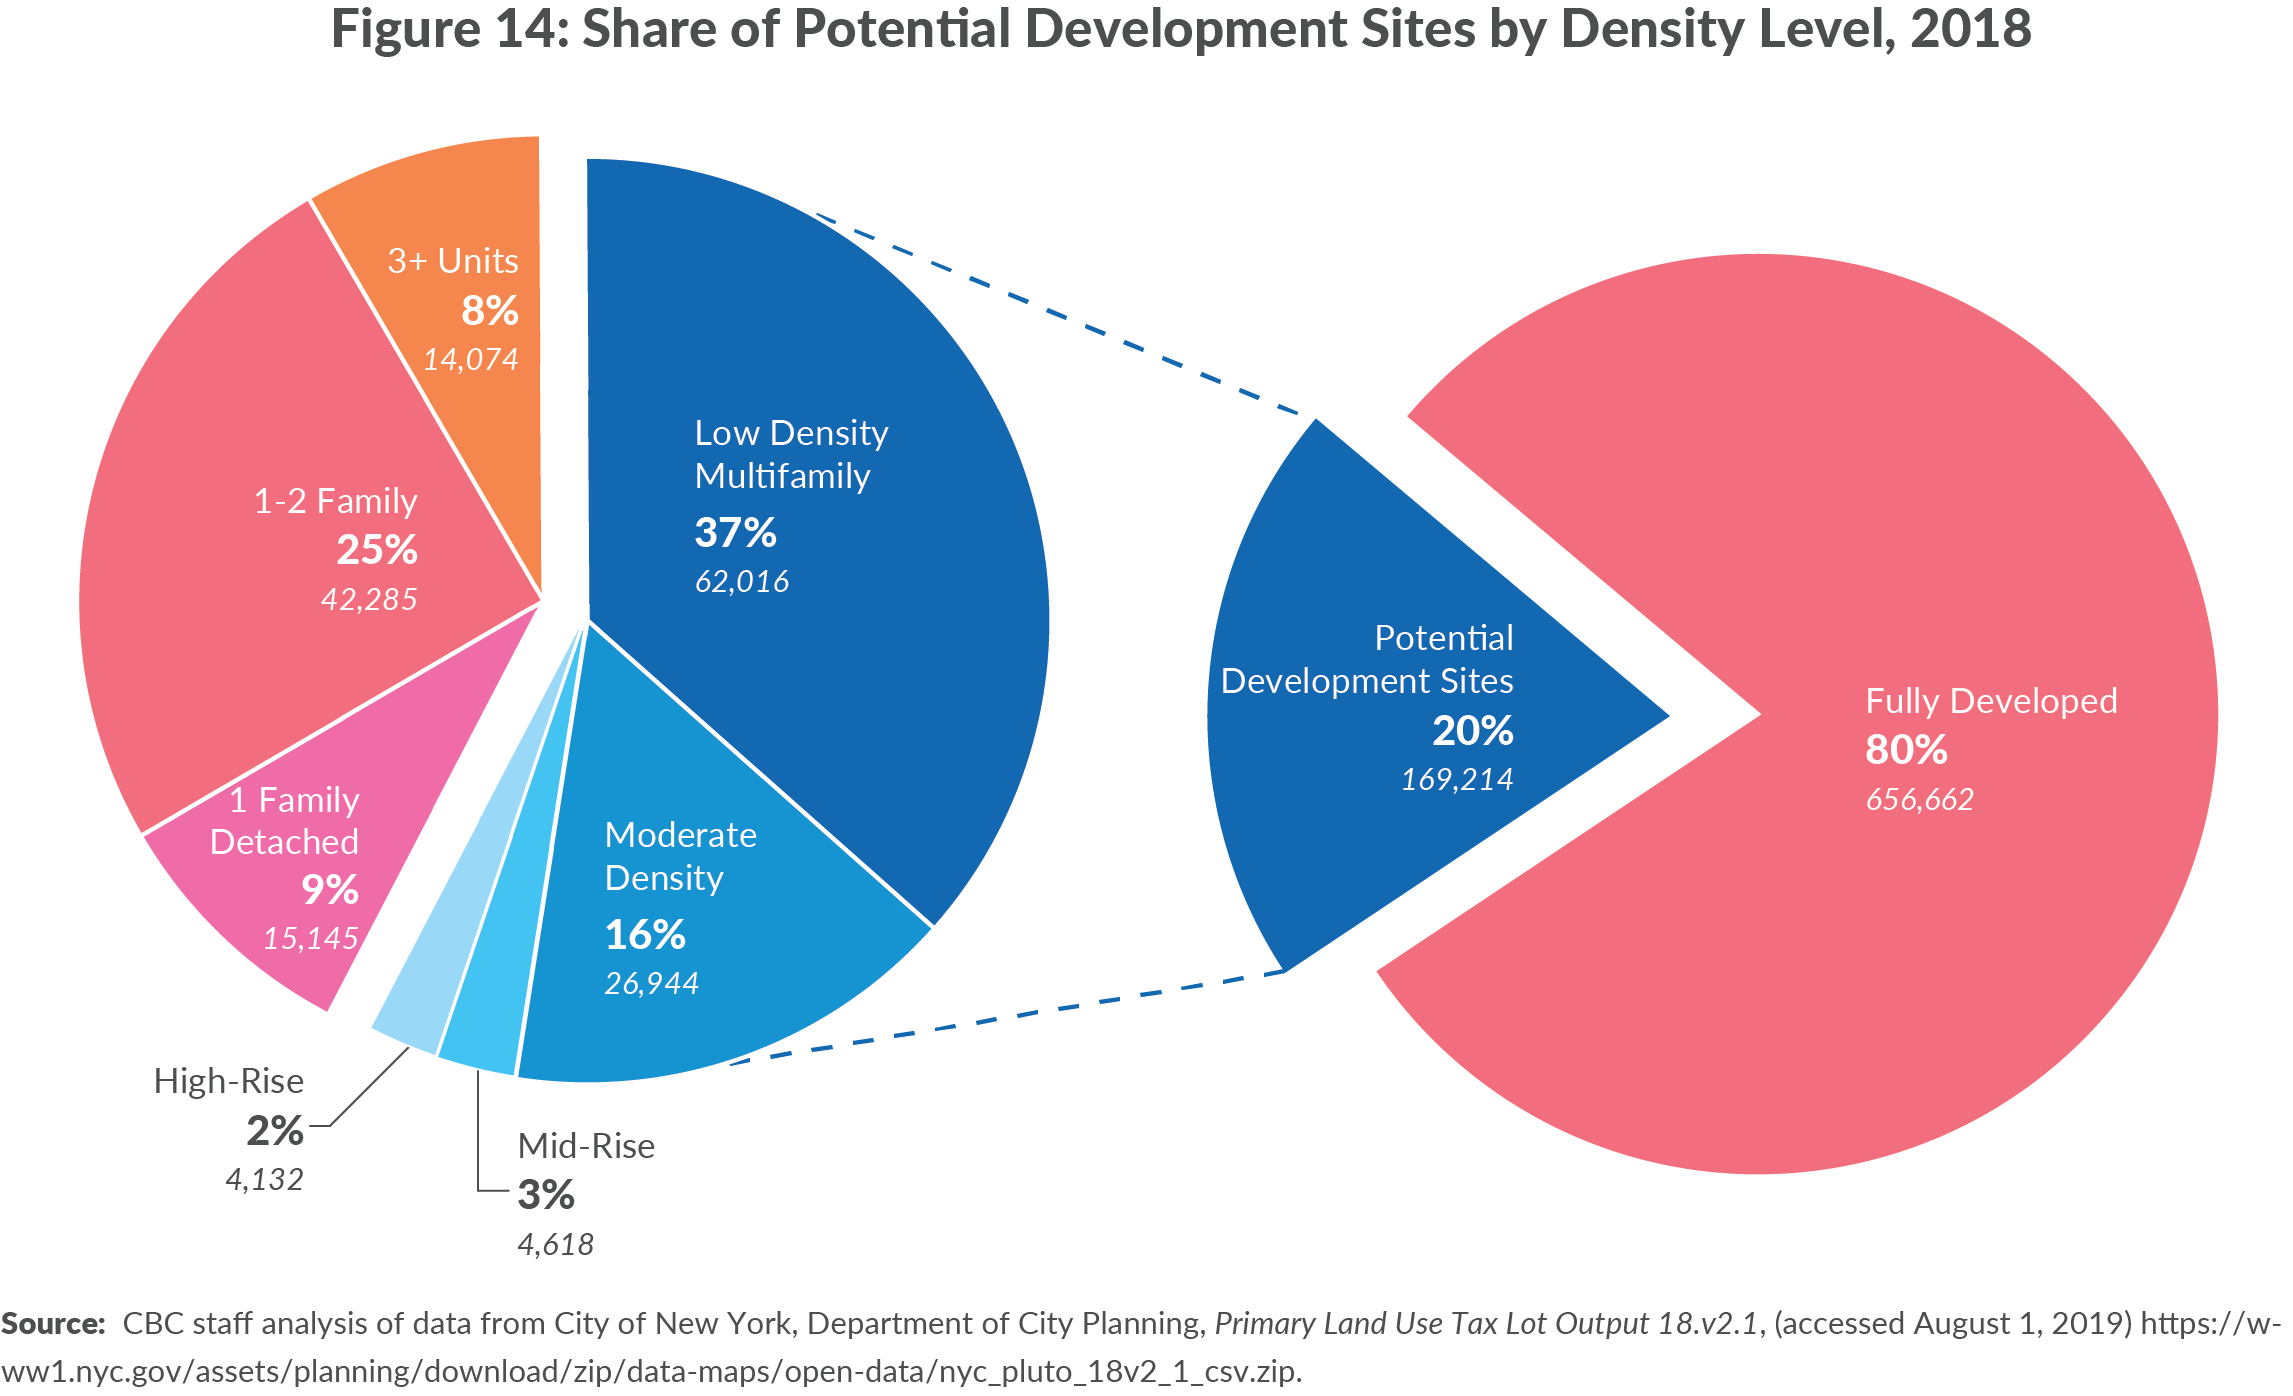 Figure 14. Share of Potential Development Sites by Density Level